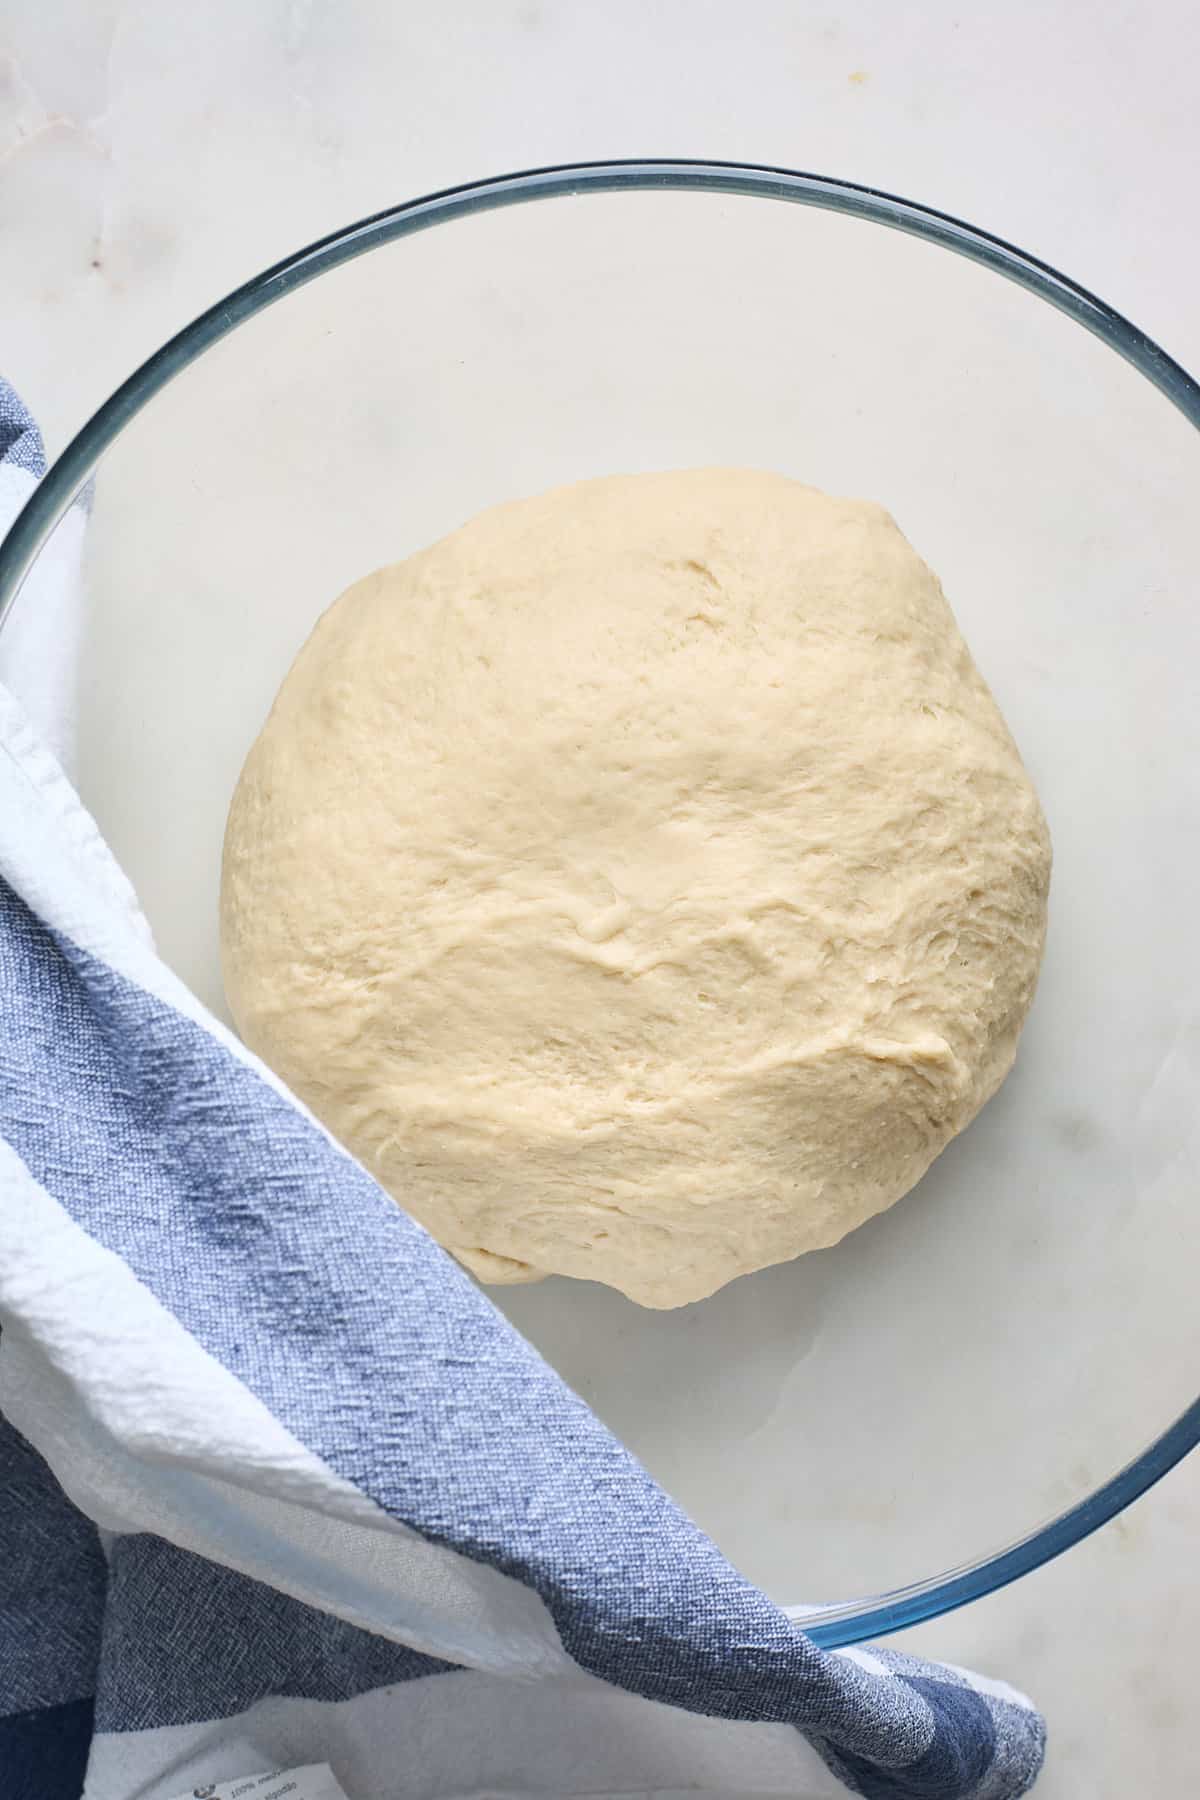 A yeasted dough in a bowl with a towel on top